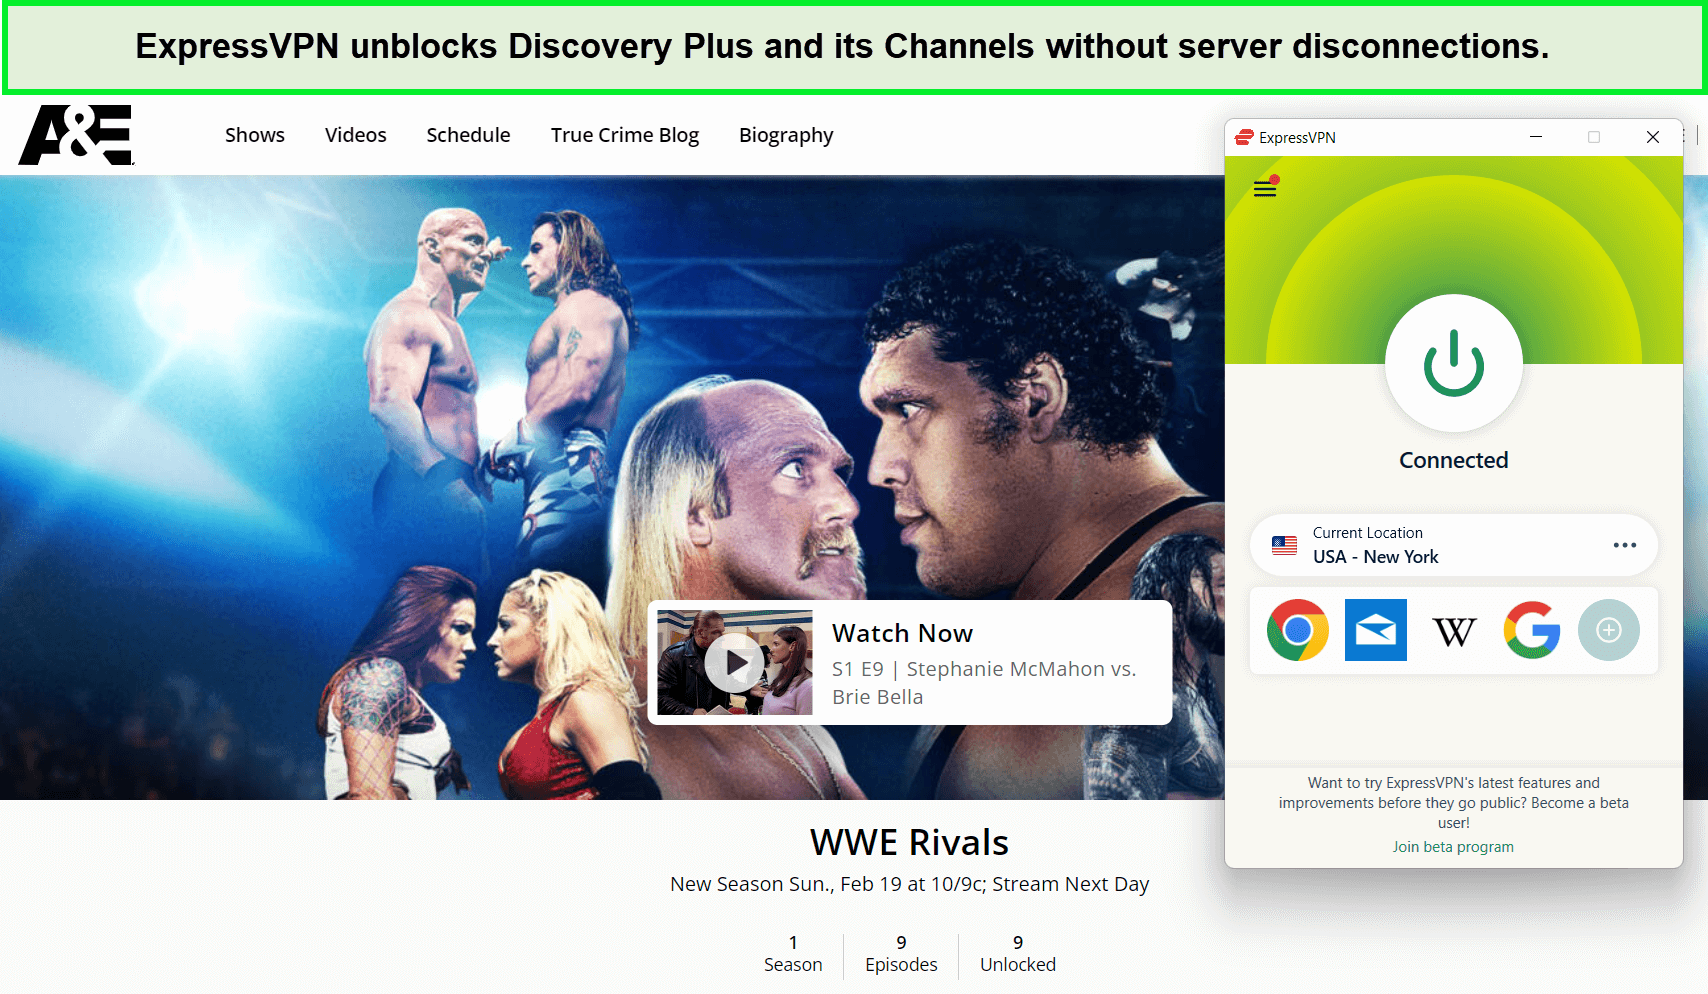 expressvpn-unblocks-wwe-rivals-on-discovery-plus-via-a-and-e-channel